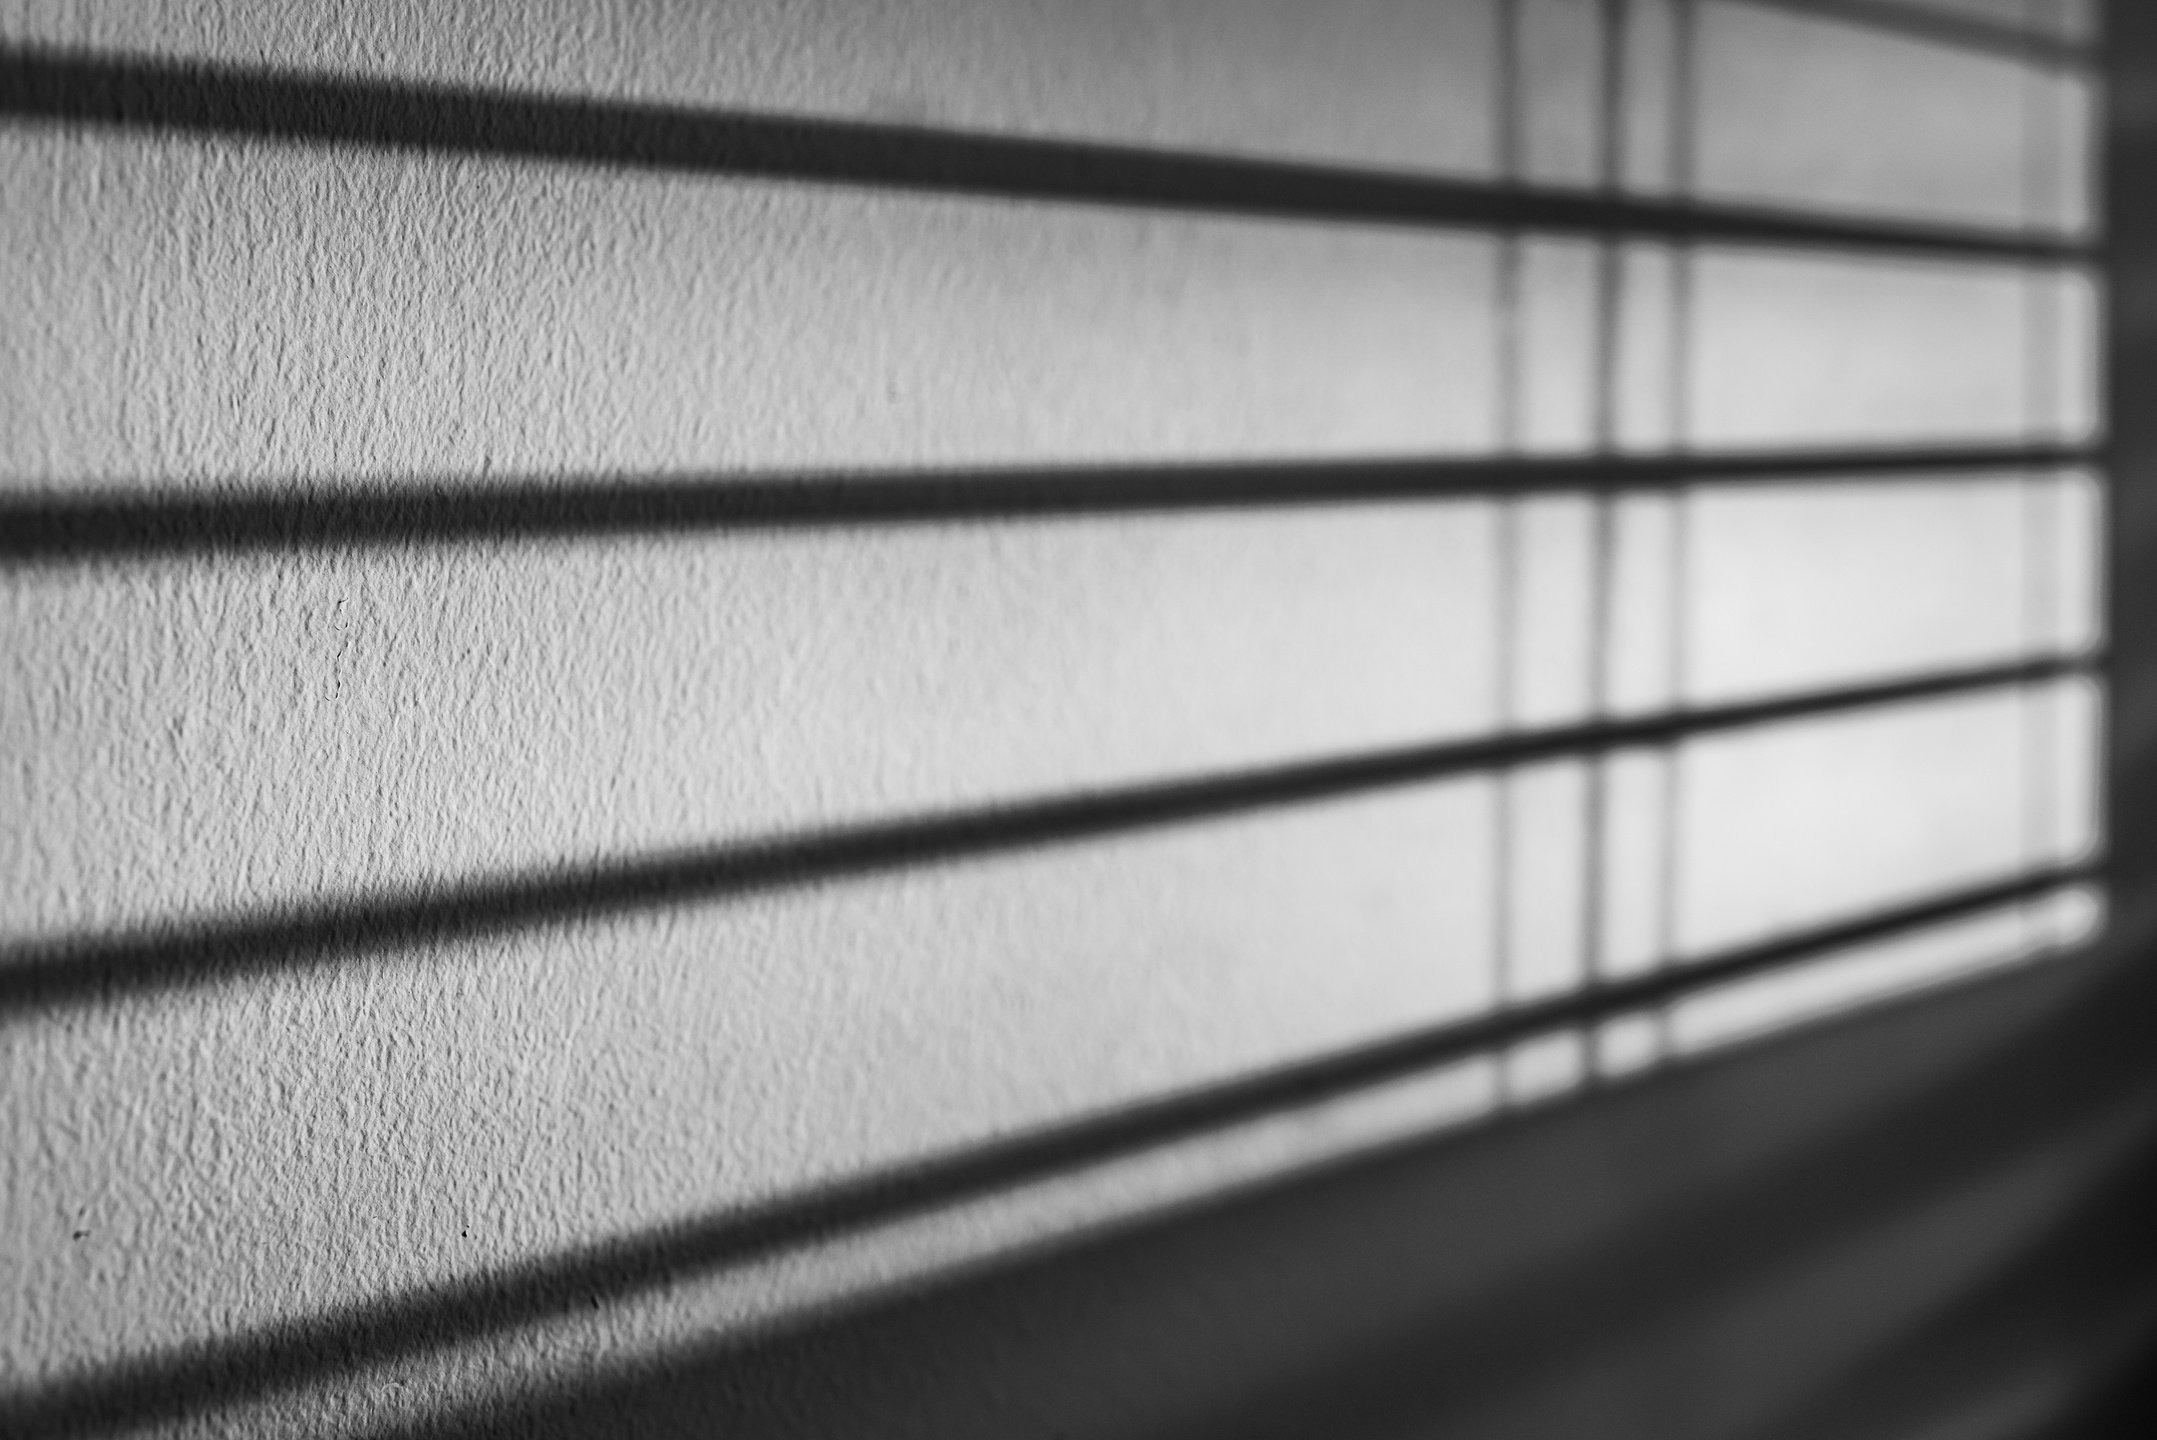 Shadow of venetian blinds caste upon an interior wall